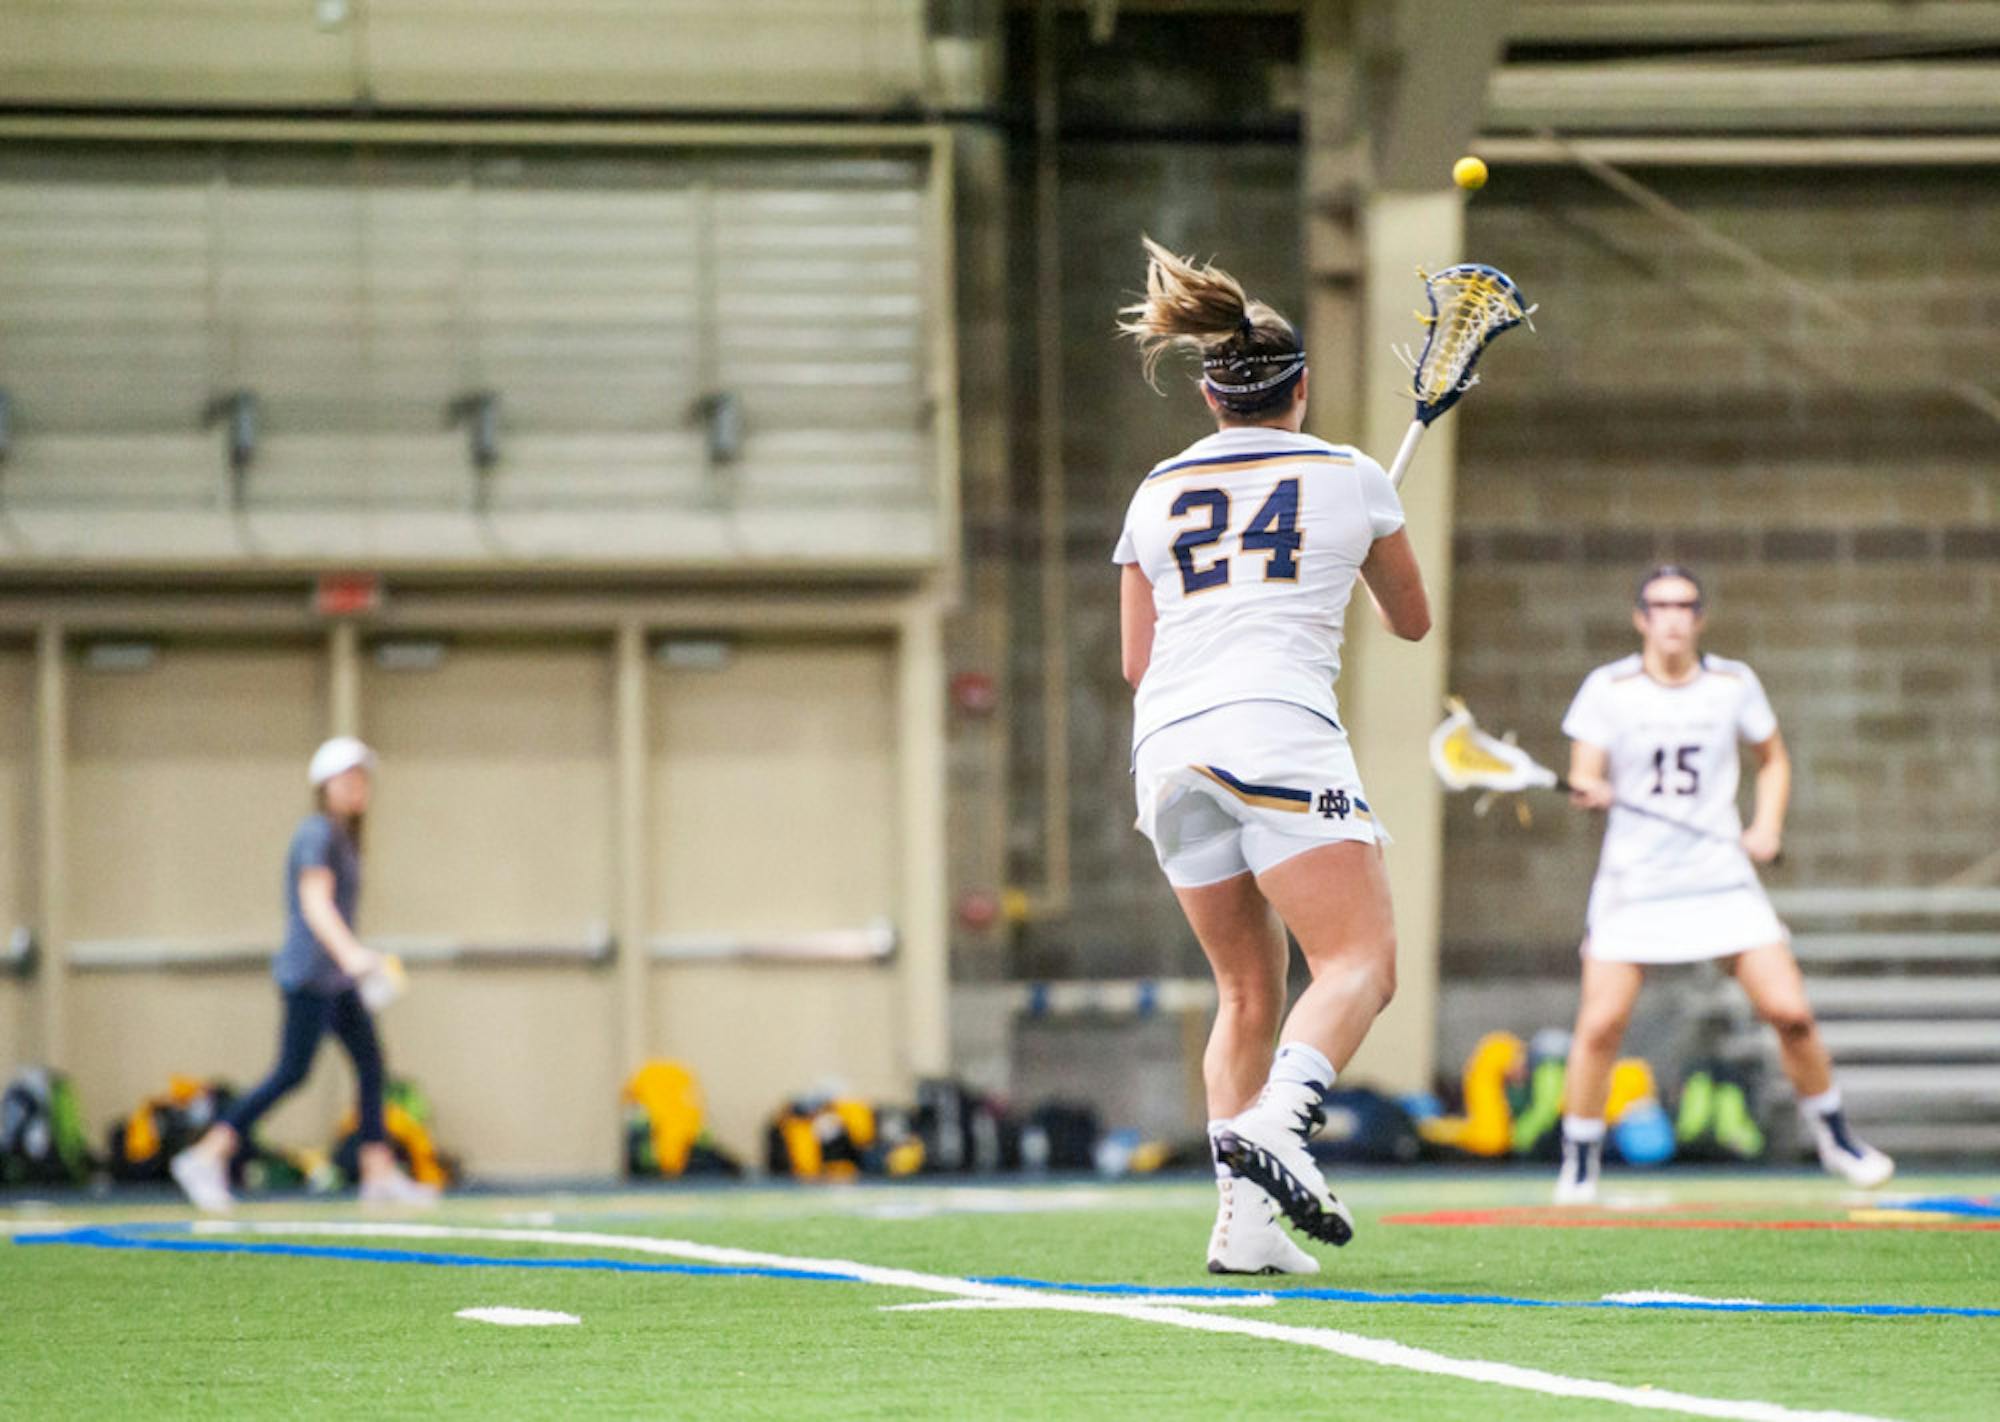 Irish senior midfielder Casey Pearsall fires a pass across the field during Notre Dame's 21-9 win over Marquette at Loftus Sports Center on Feb. 14.